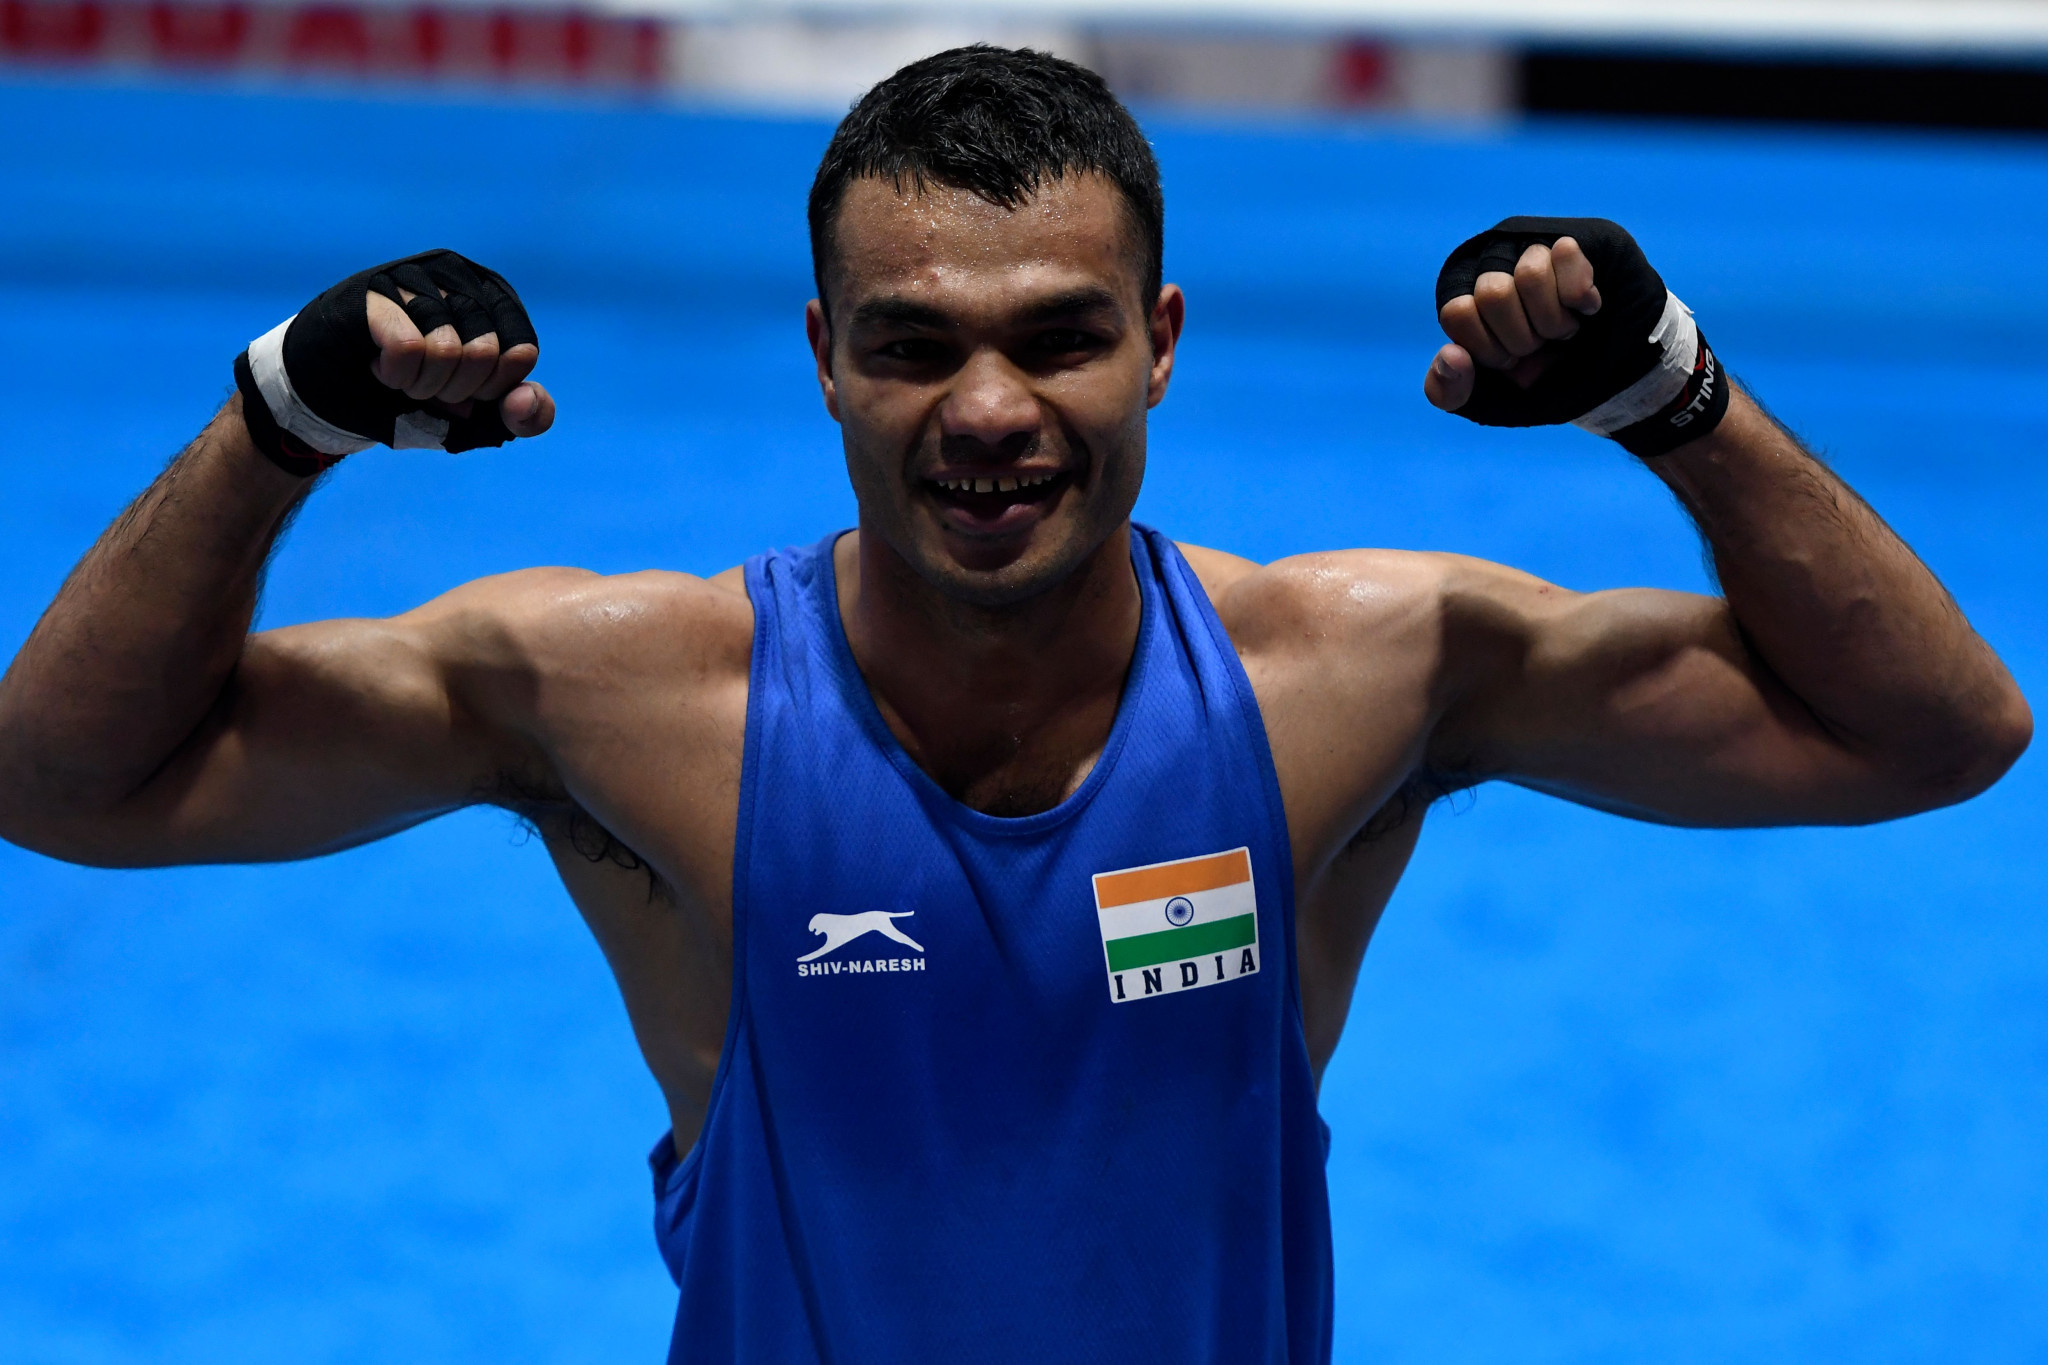 India's boxing team are undergoing an extended period of quarantine before training can resume ©Getty Images